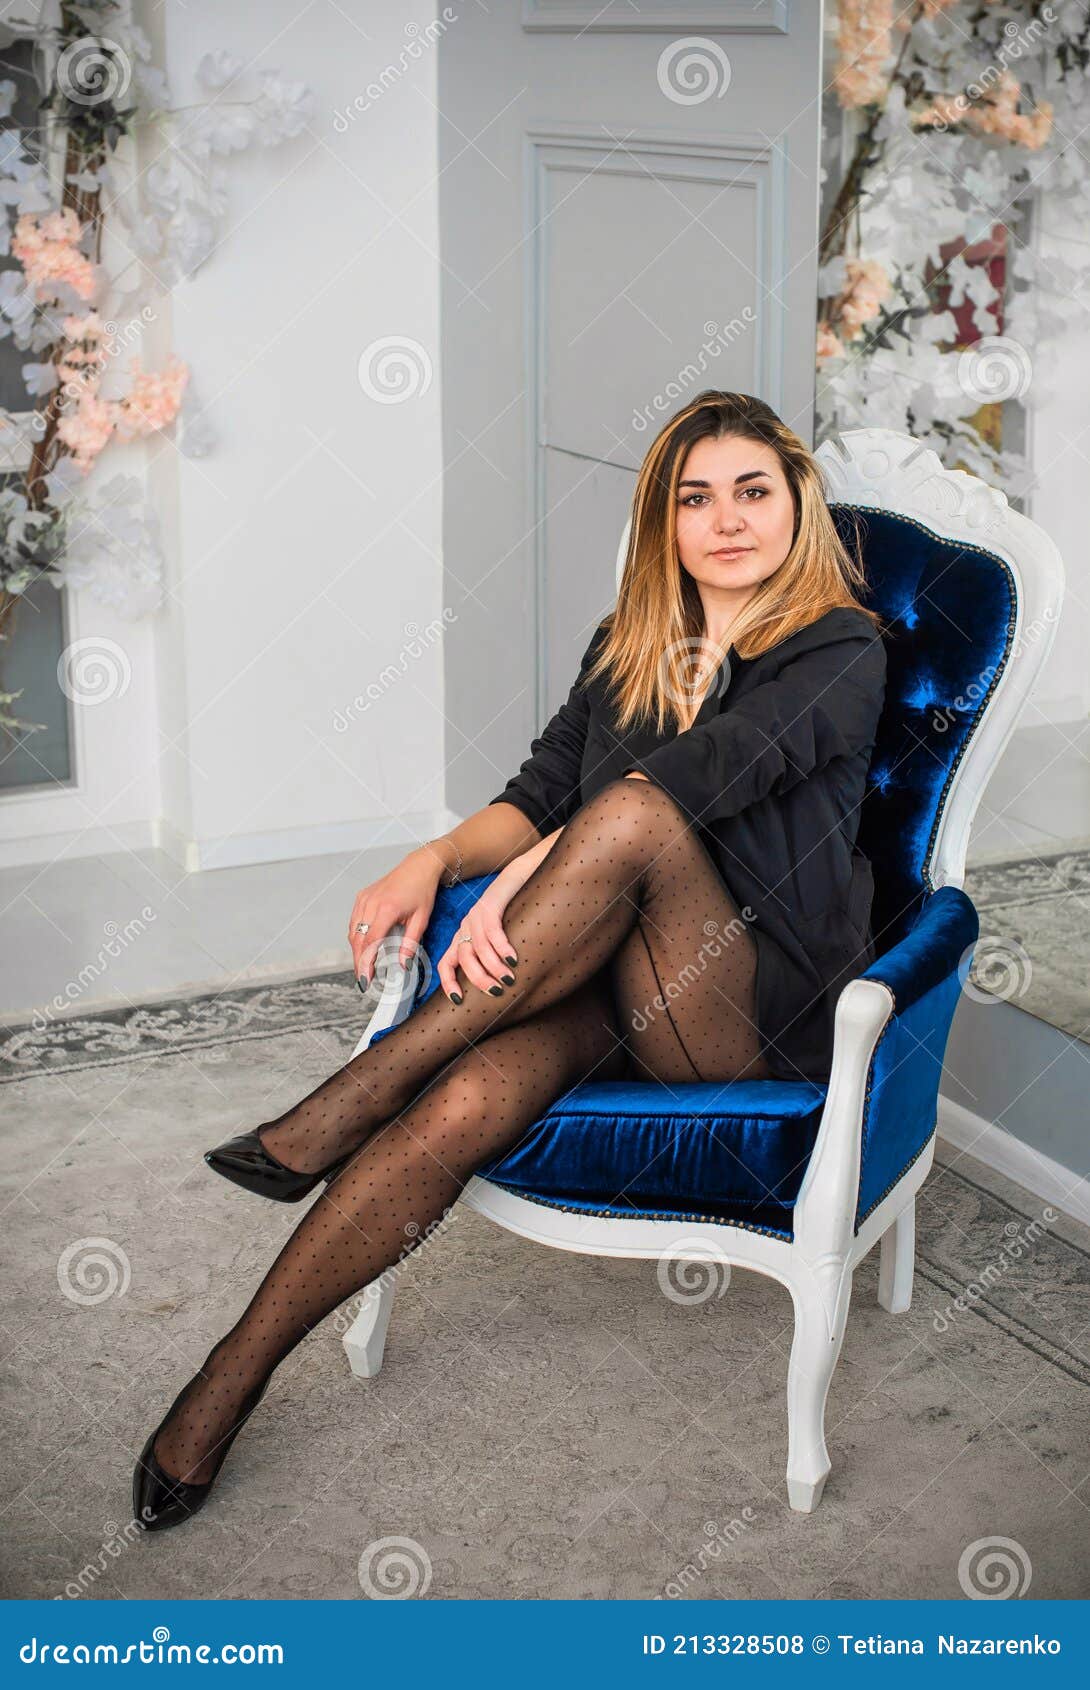 antoinette pace share latina women in pantyhose photos